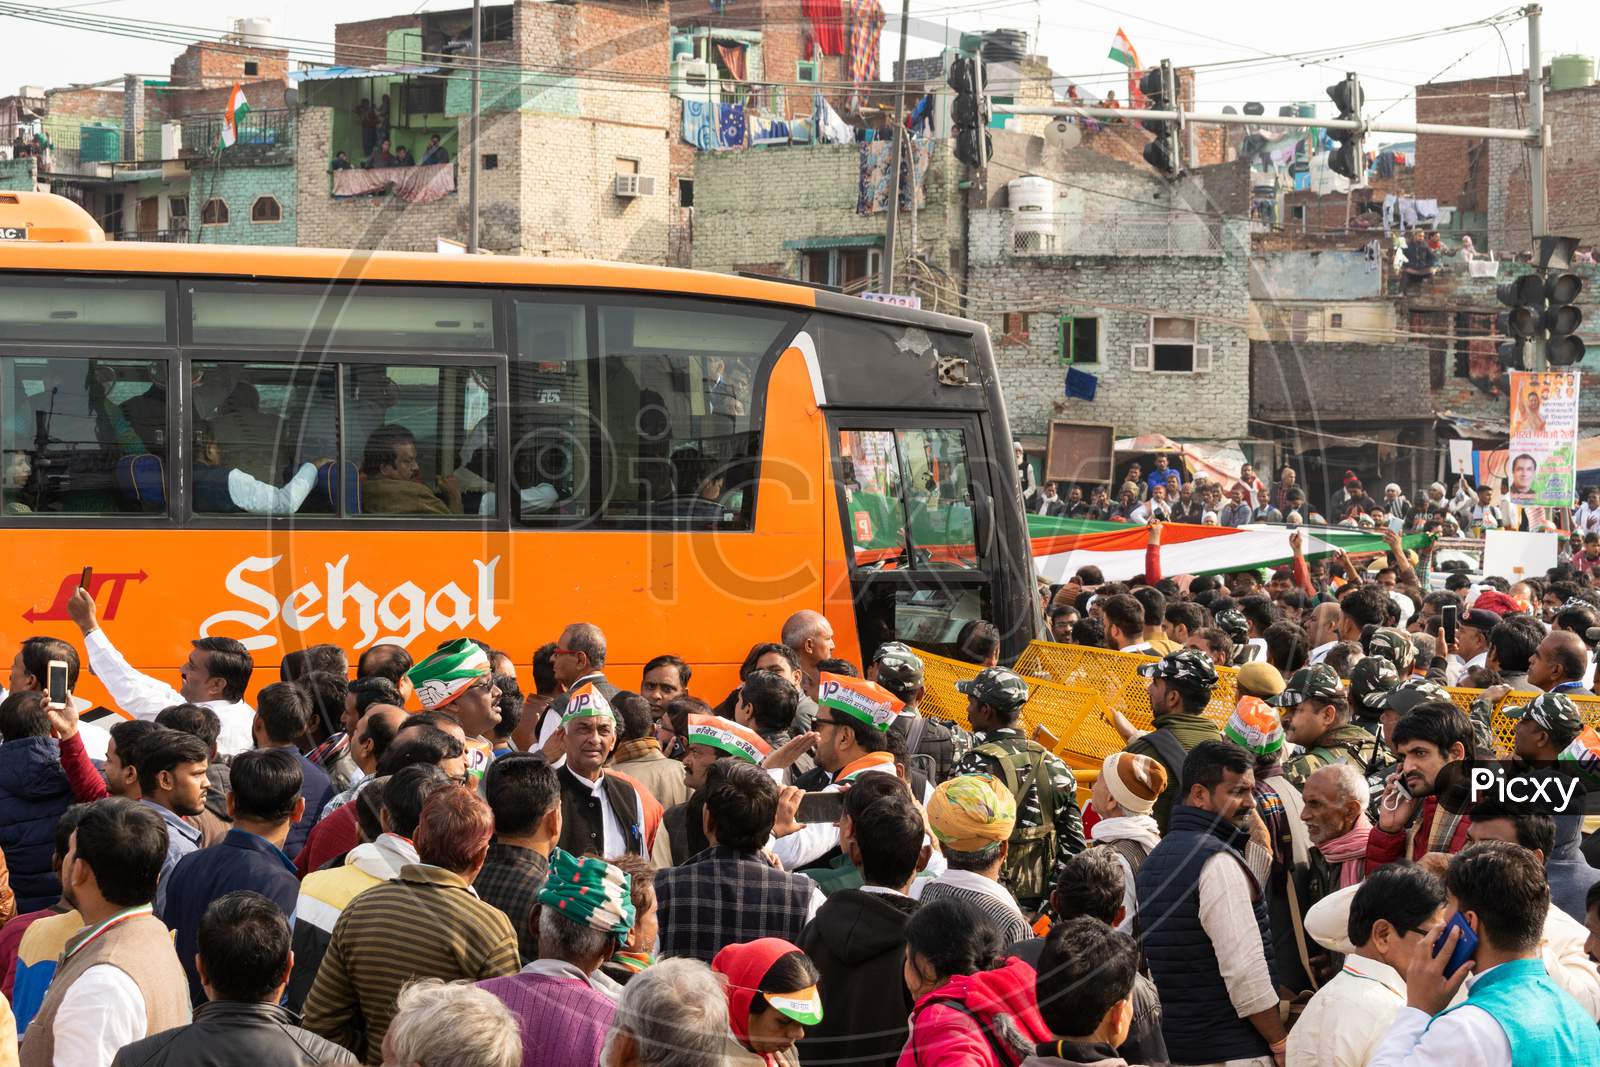 Congress party politicians in a bus and Congress workers with flags during 'Bharat Bachao' rally by Congress in Delhi to highlight Modi govt failures